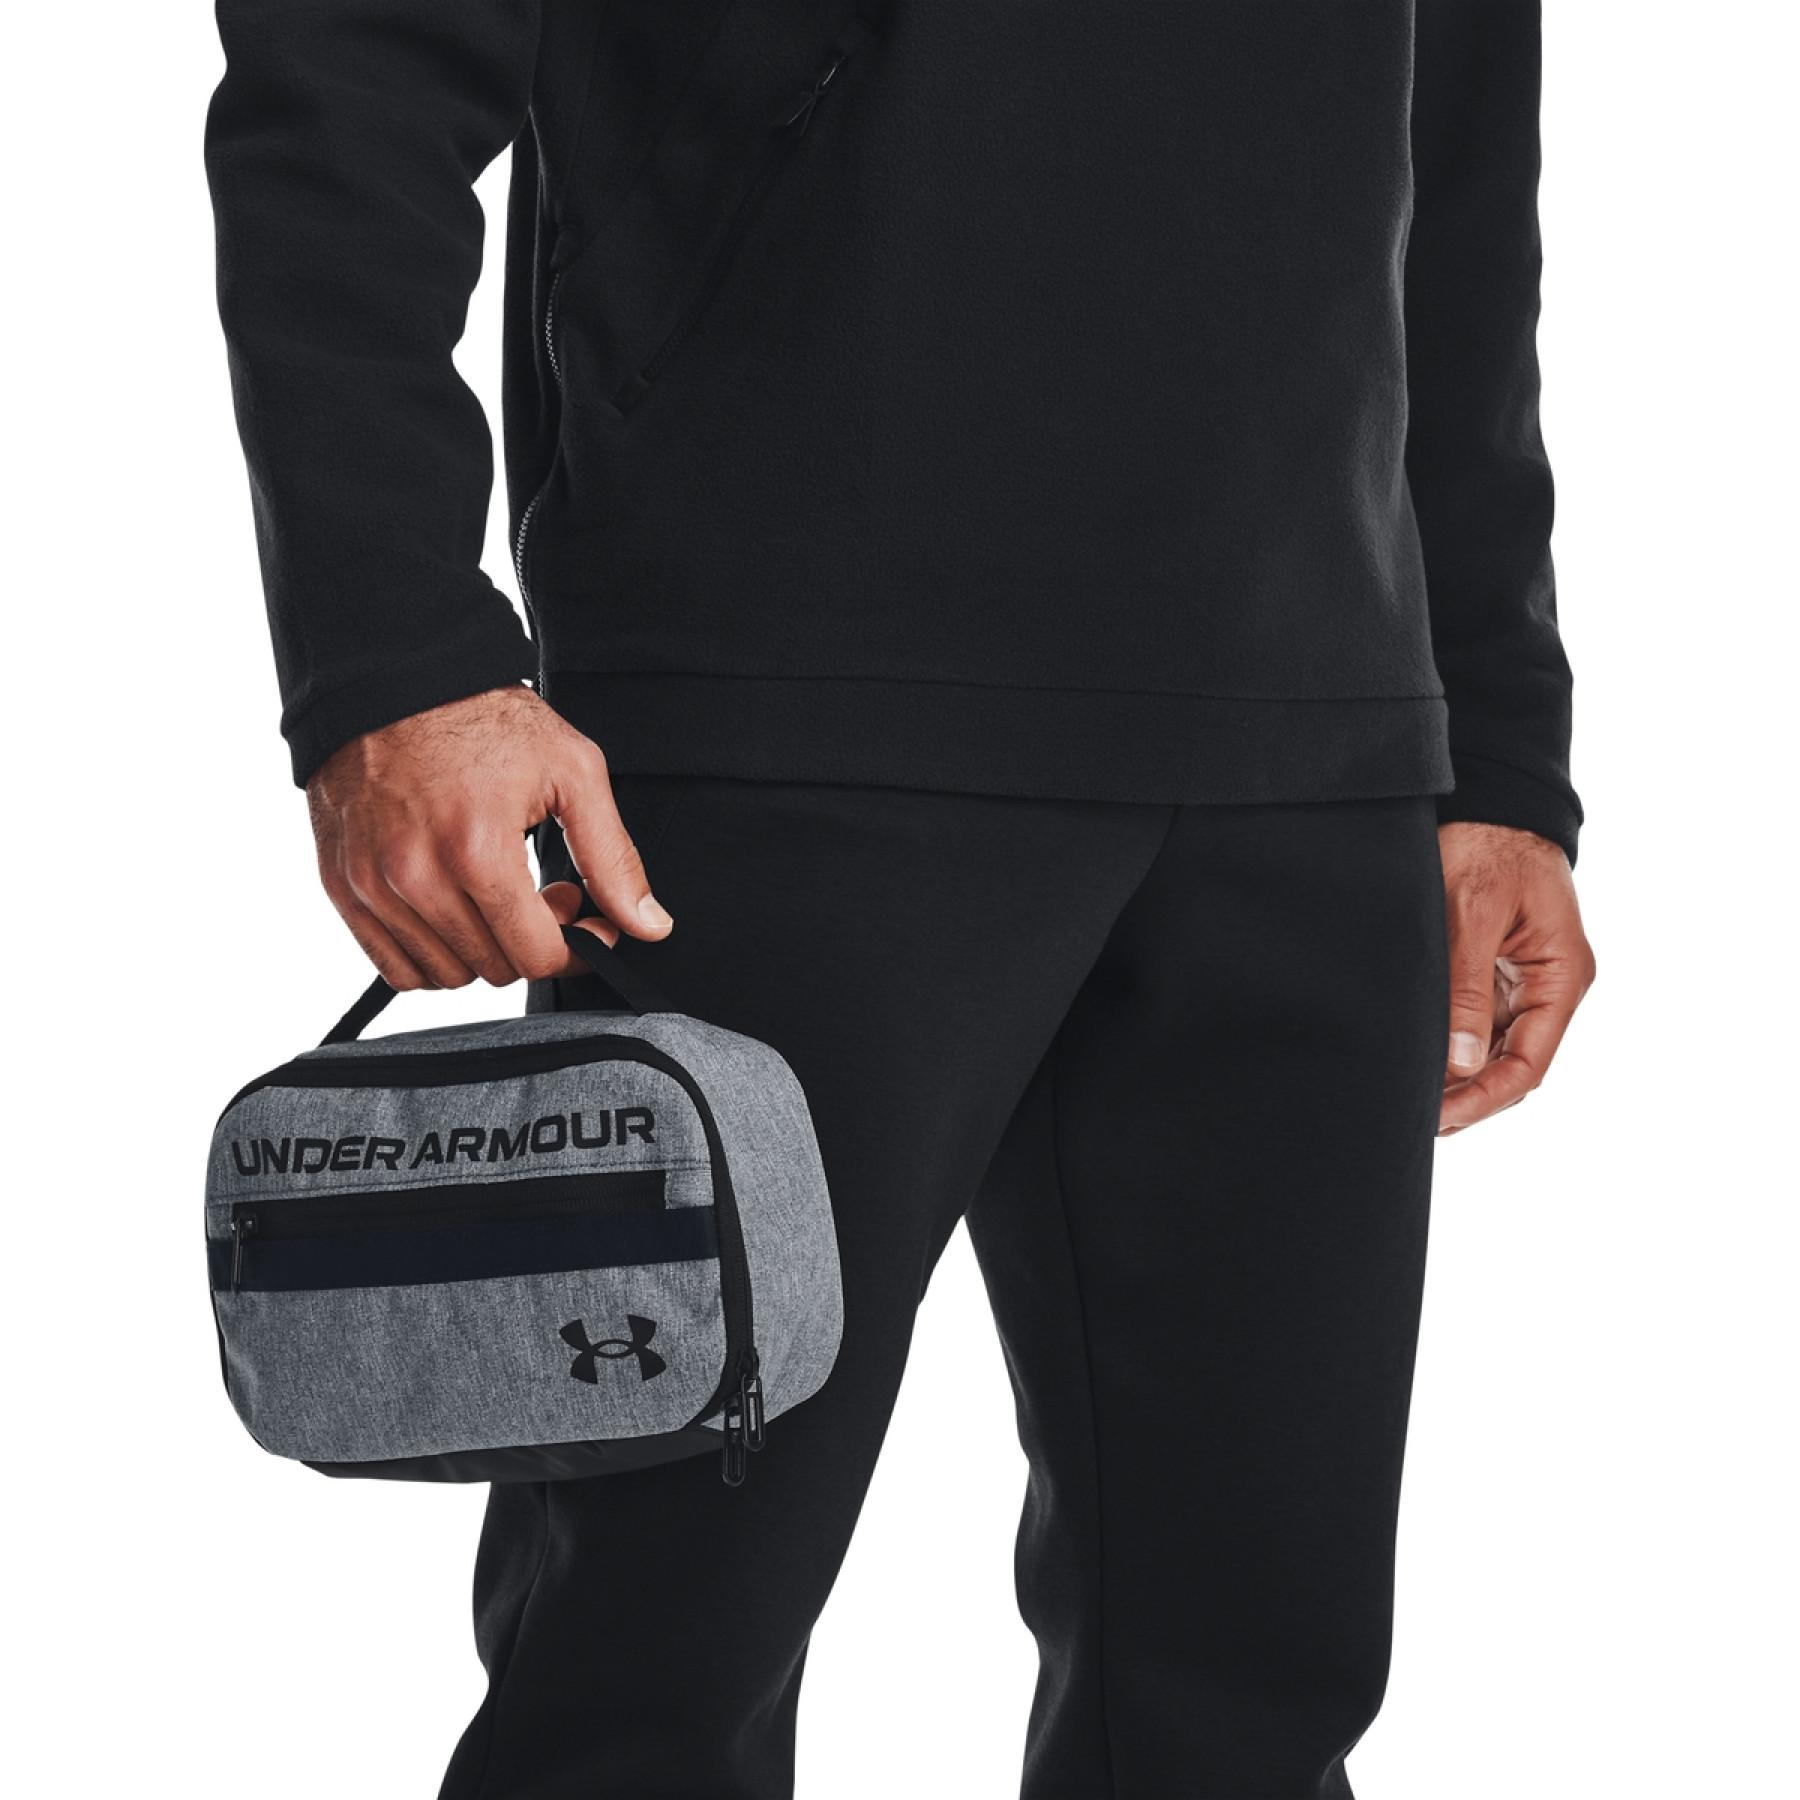 Under Armour, Accessories, Under Armour Lunch Box